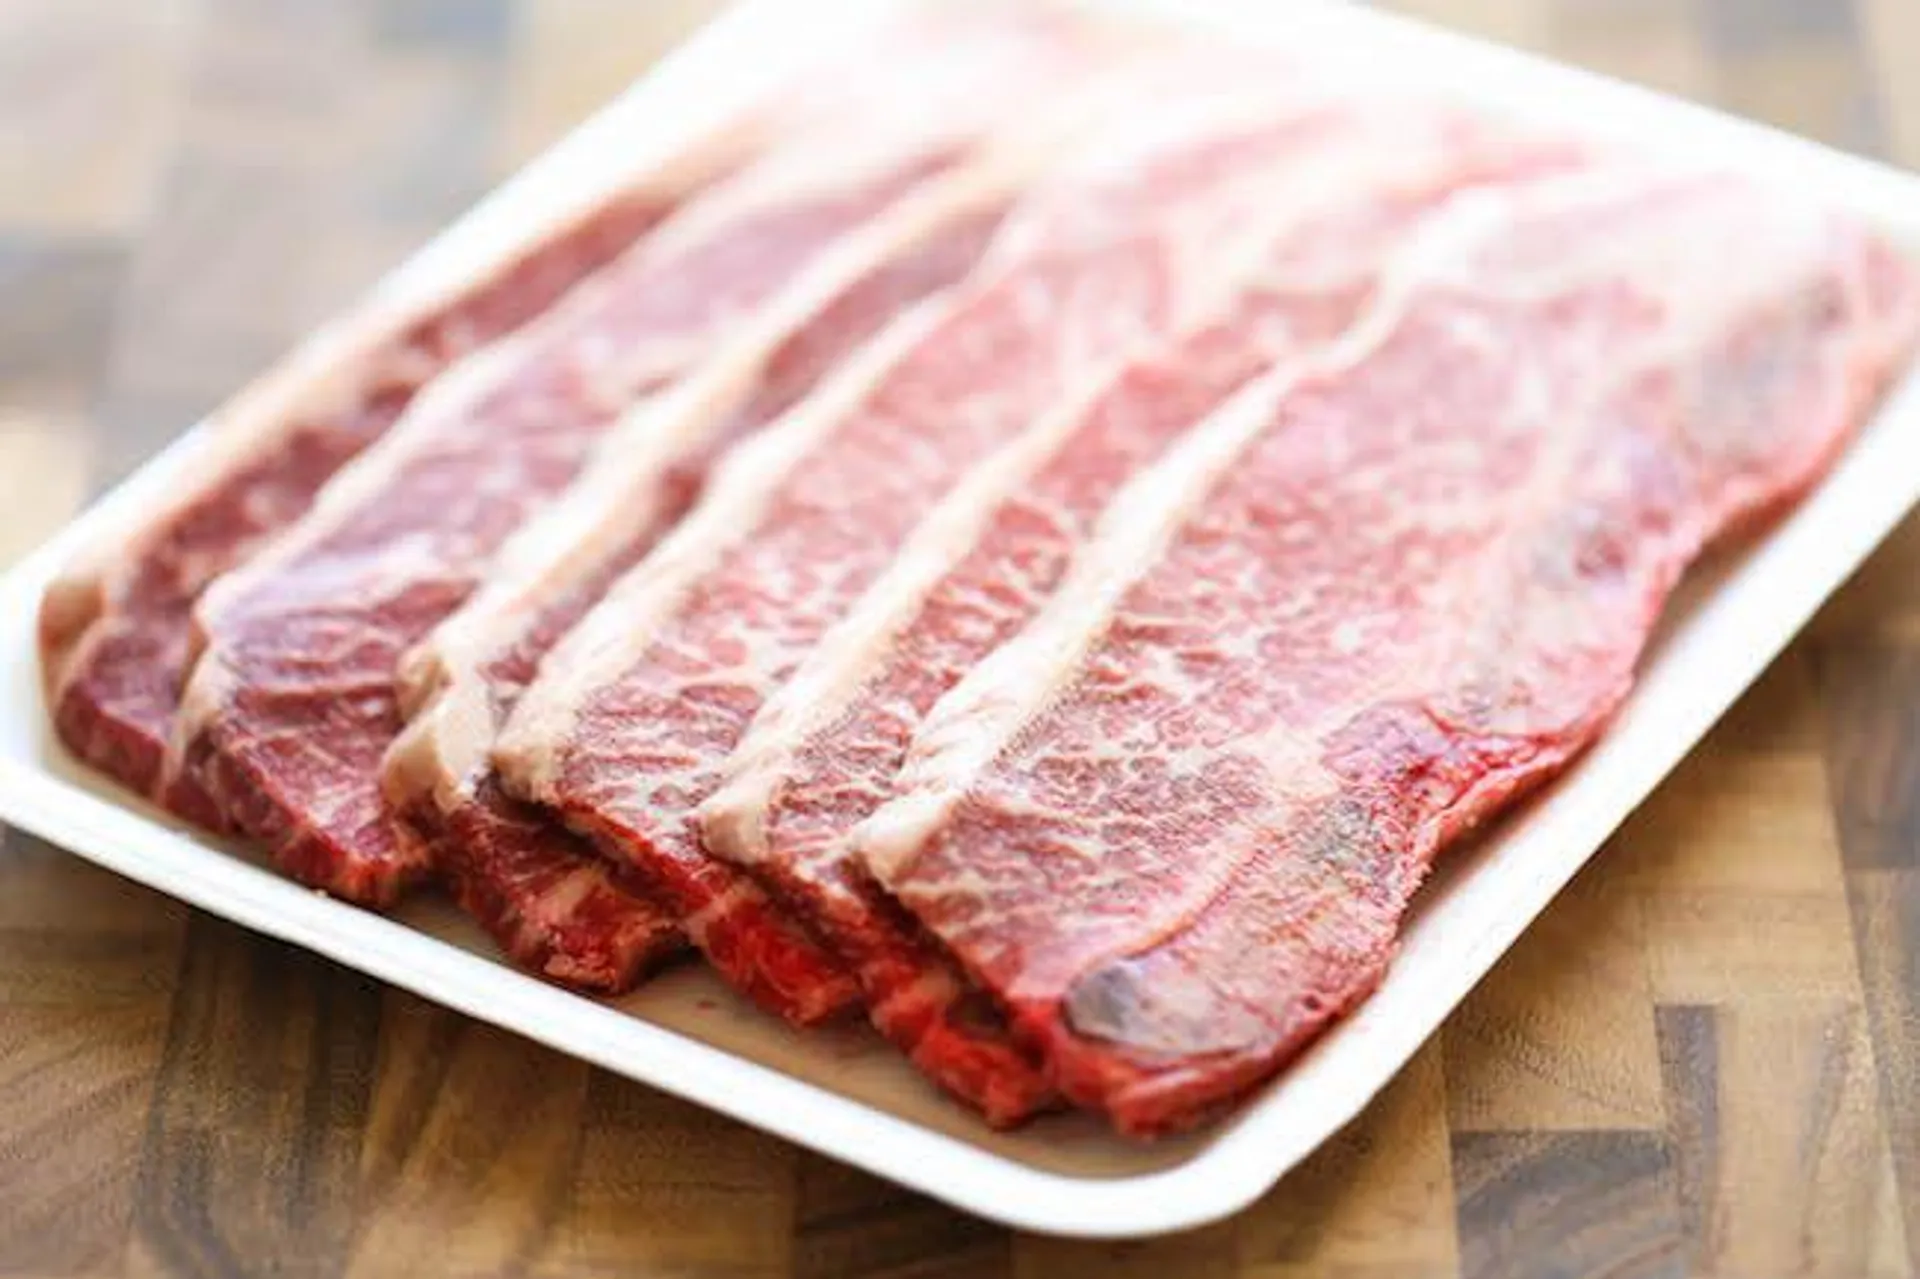 Frozen beef short rib slice (approx 450g) - 1pack